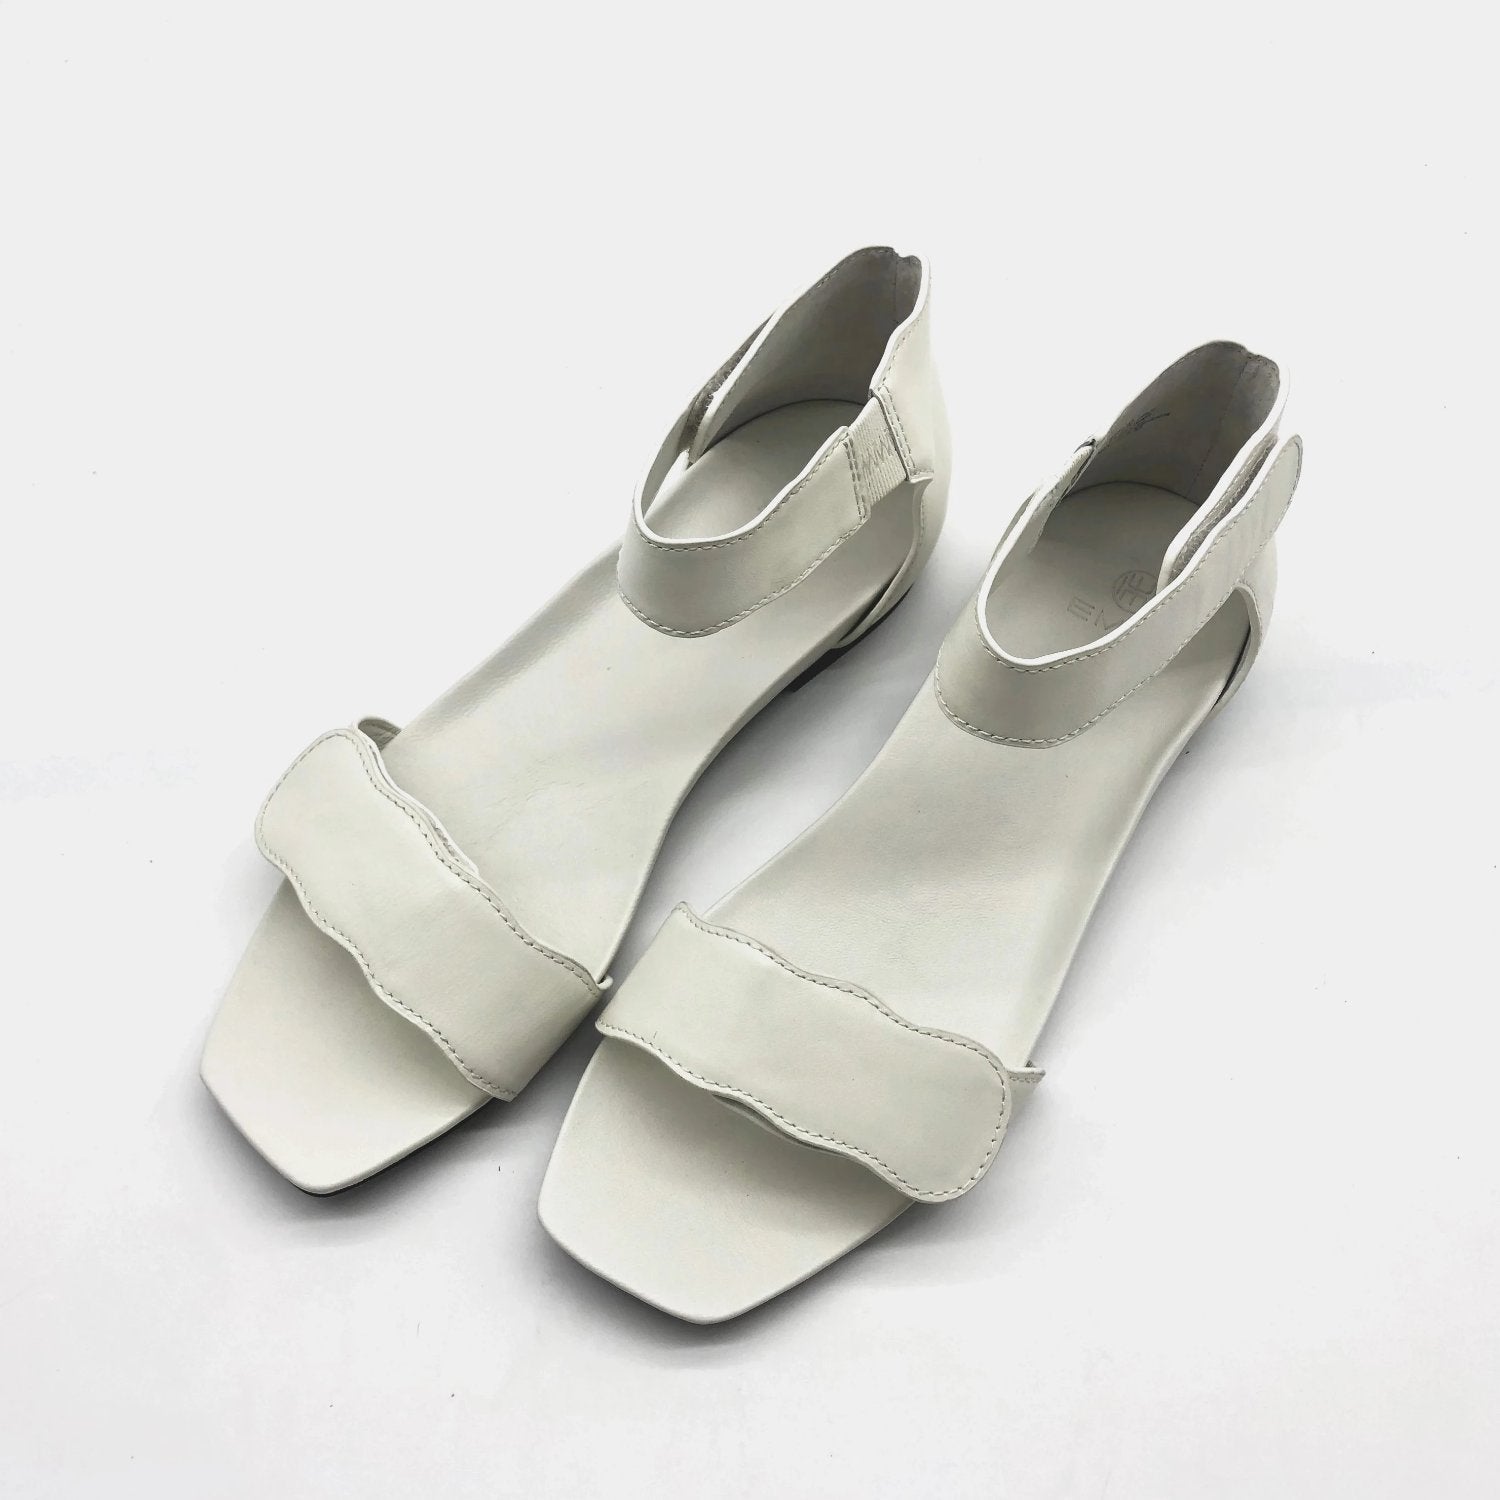 Light-weight White leather sandals with adjustable strapes and arch support. Bio-contoured footbed, wide feet friendly